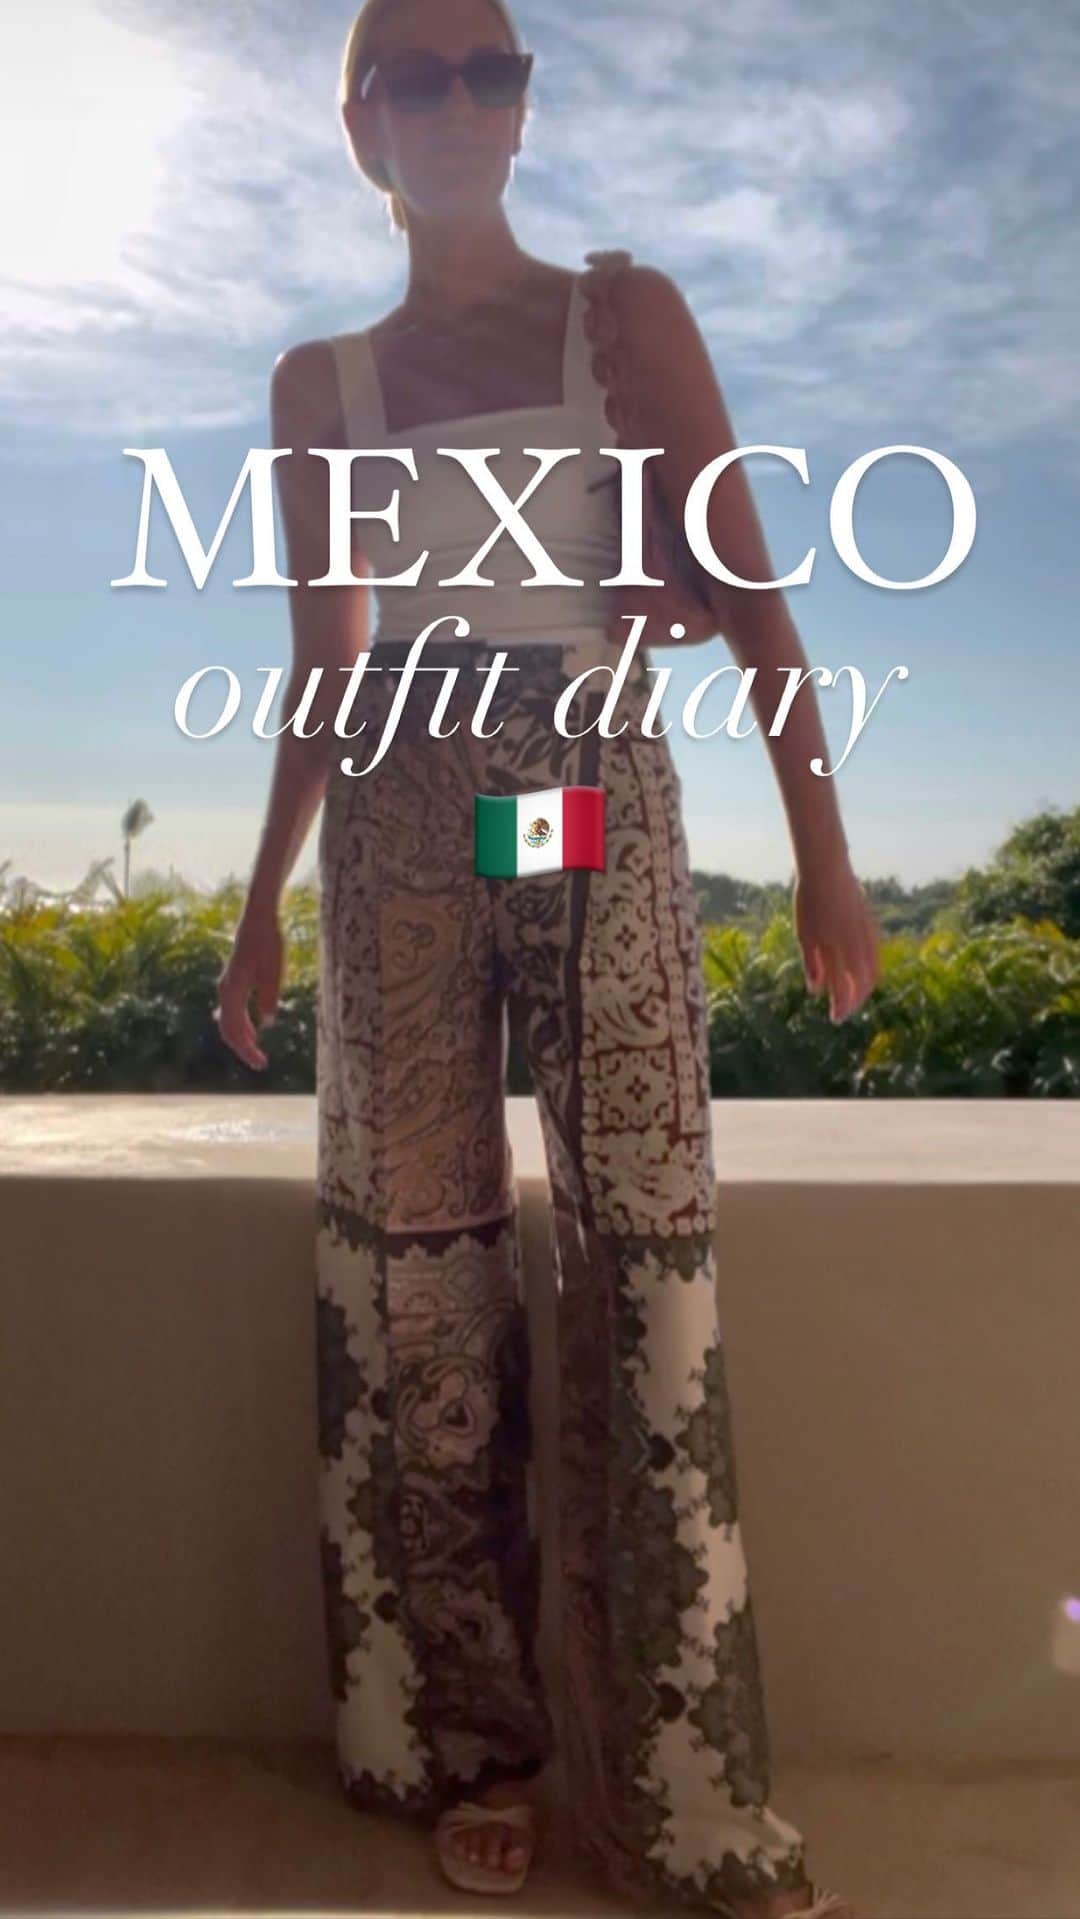 Anna Jane Wisniewskiのインスタグラム：「A week’s worth of outfits from Mexico! Will share what I can, but as you know, I re-wear lots of things from yesteryear 😎🇲🇽 #vacationoutfit #puntamita #sayulita #springbreakstyle」